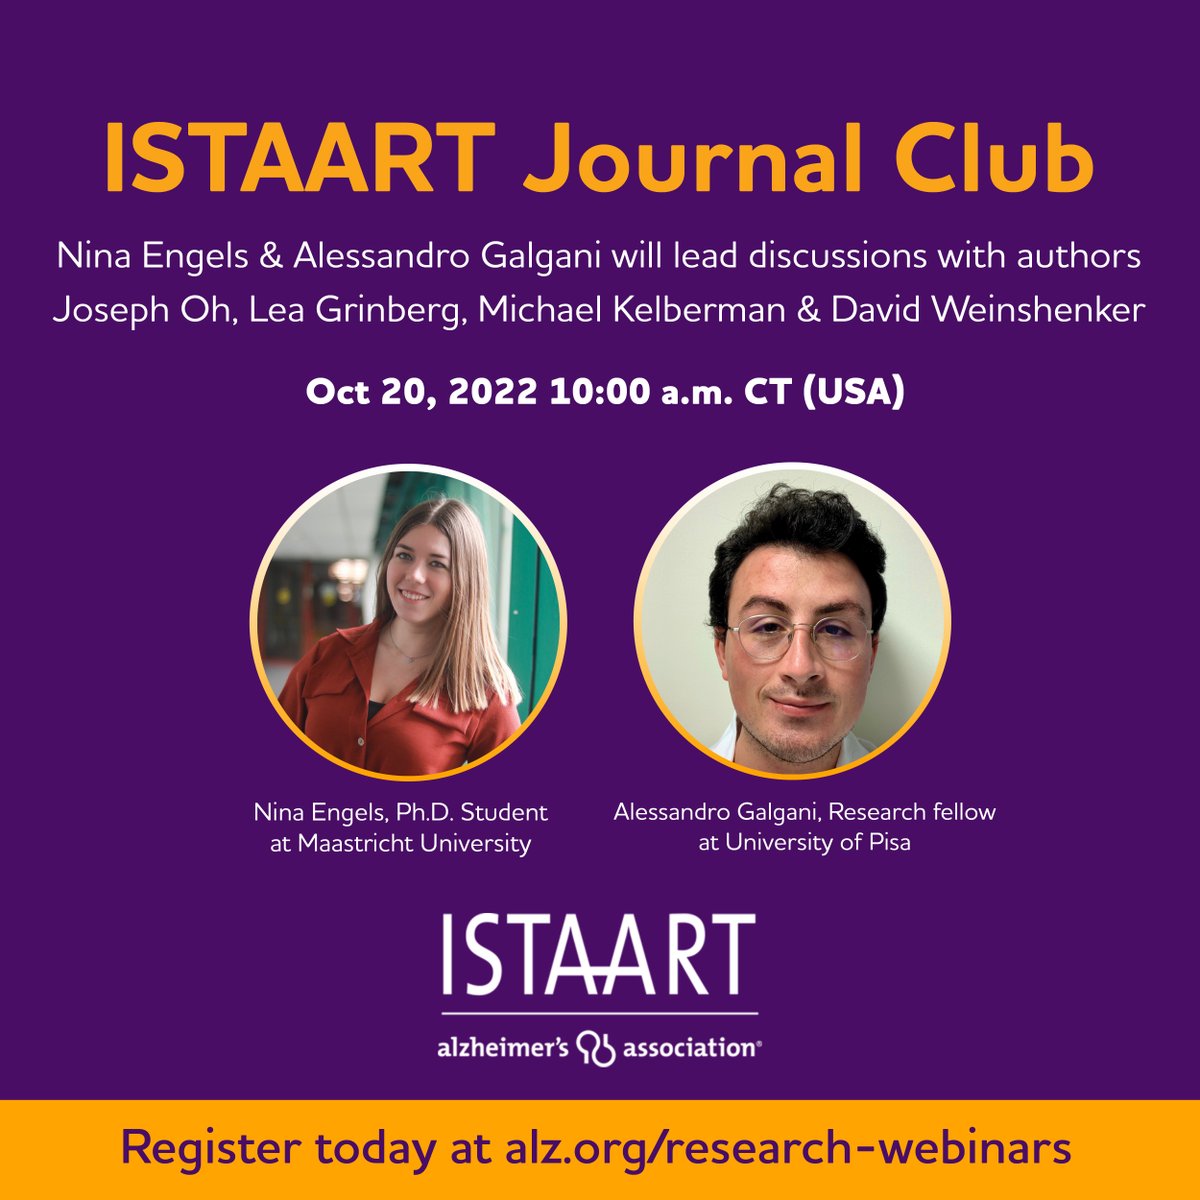 Save the date! 📅 At the next Journal Club @NinaEngels and @alessandrogalg5 will be discussing with the authors @josephoh0517 @MikeKelberman 2 impactful papers on locus coeruleus & sleep in Alzheimer's Disease: jamanetwork.com/journals/jaman… content.iospress.com/articles/journ… Register on @ISTAART